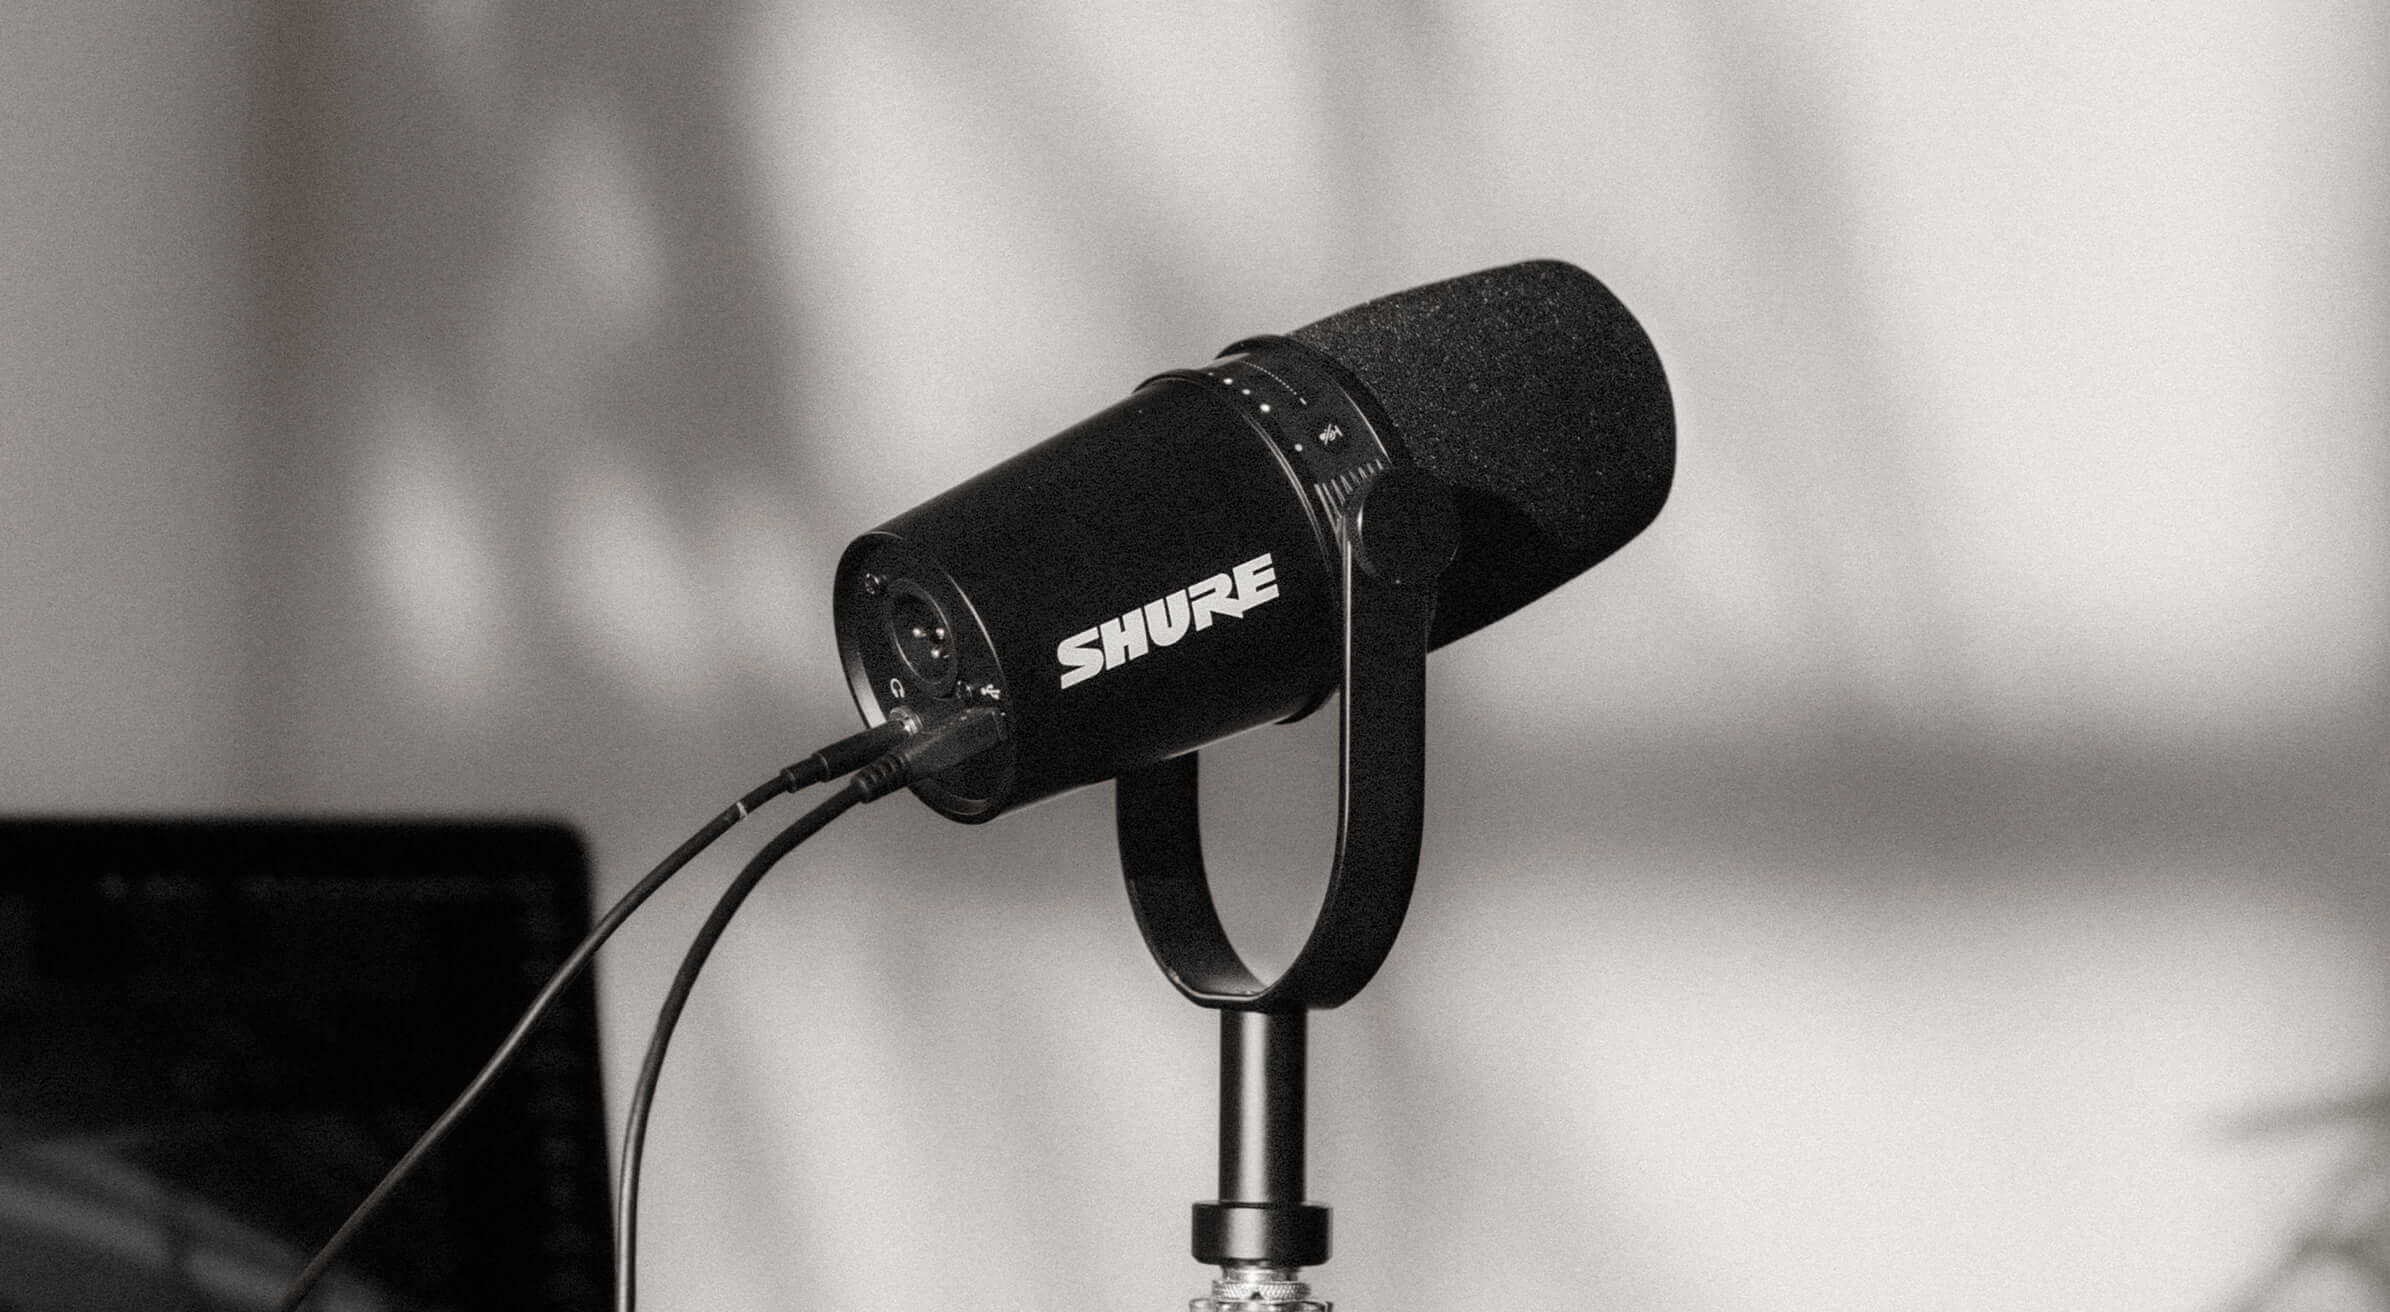 Shure unveil their new home and studio podcast microphone – MV7